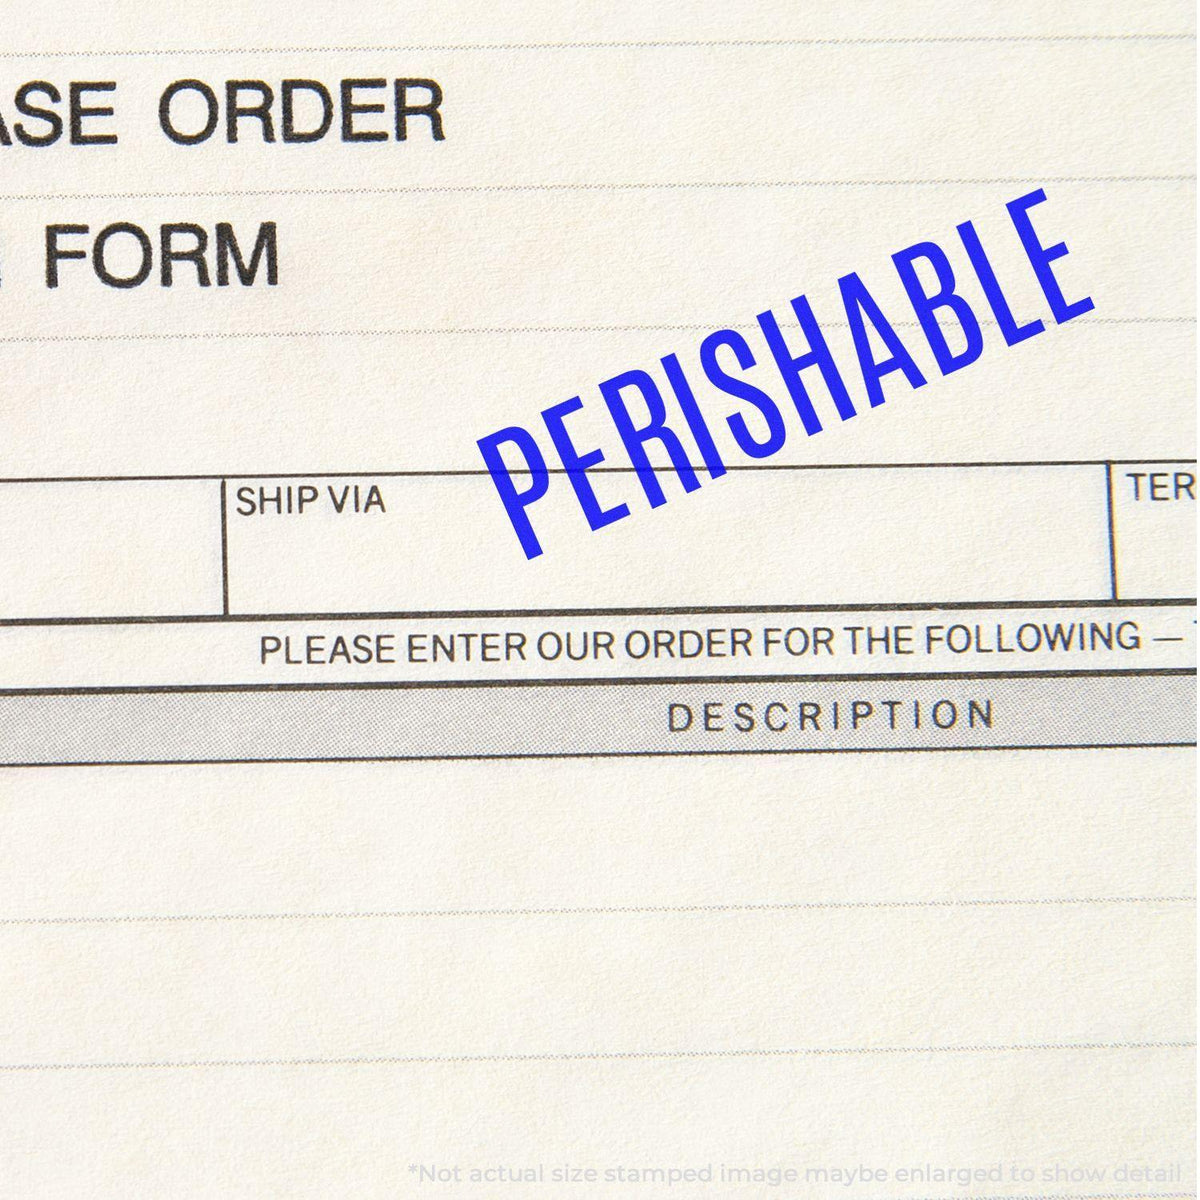 In Use Large Perishable Rubber Stamp Image